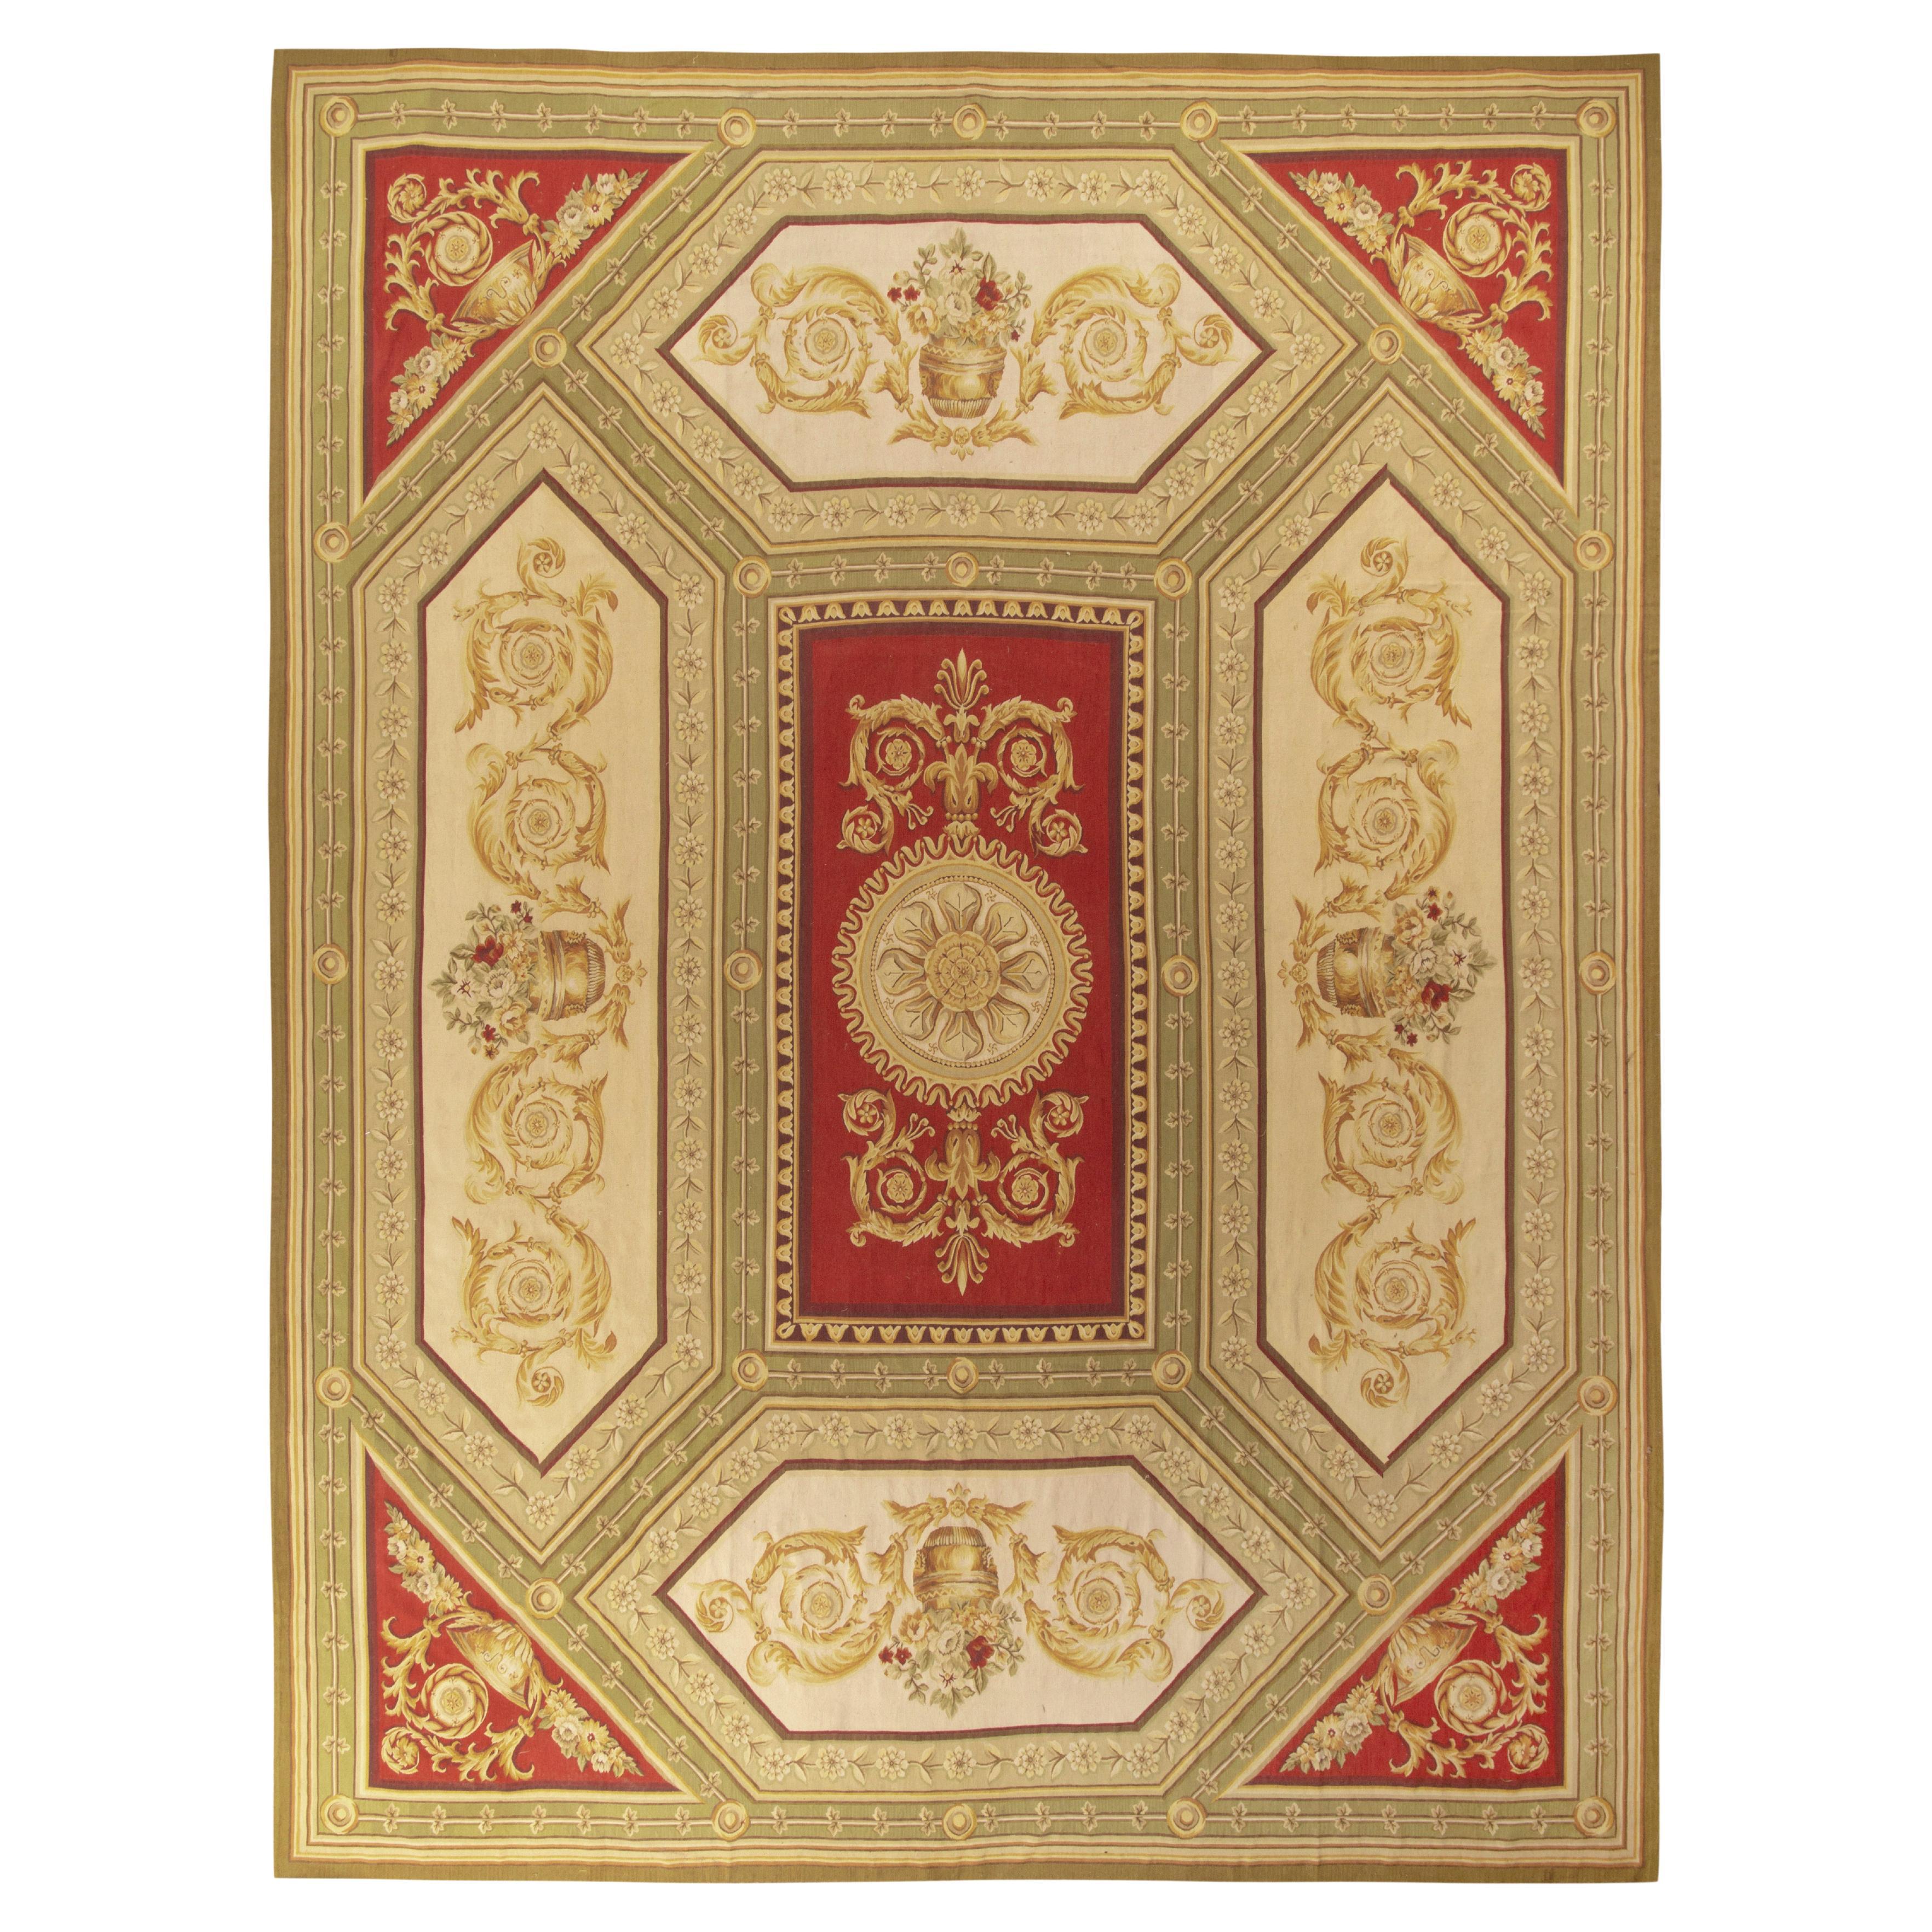 Rug & Kilim’s Aubusson Flat Weave Style Rug, Red and Green Floral Patterns For Sale